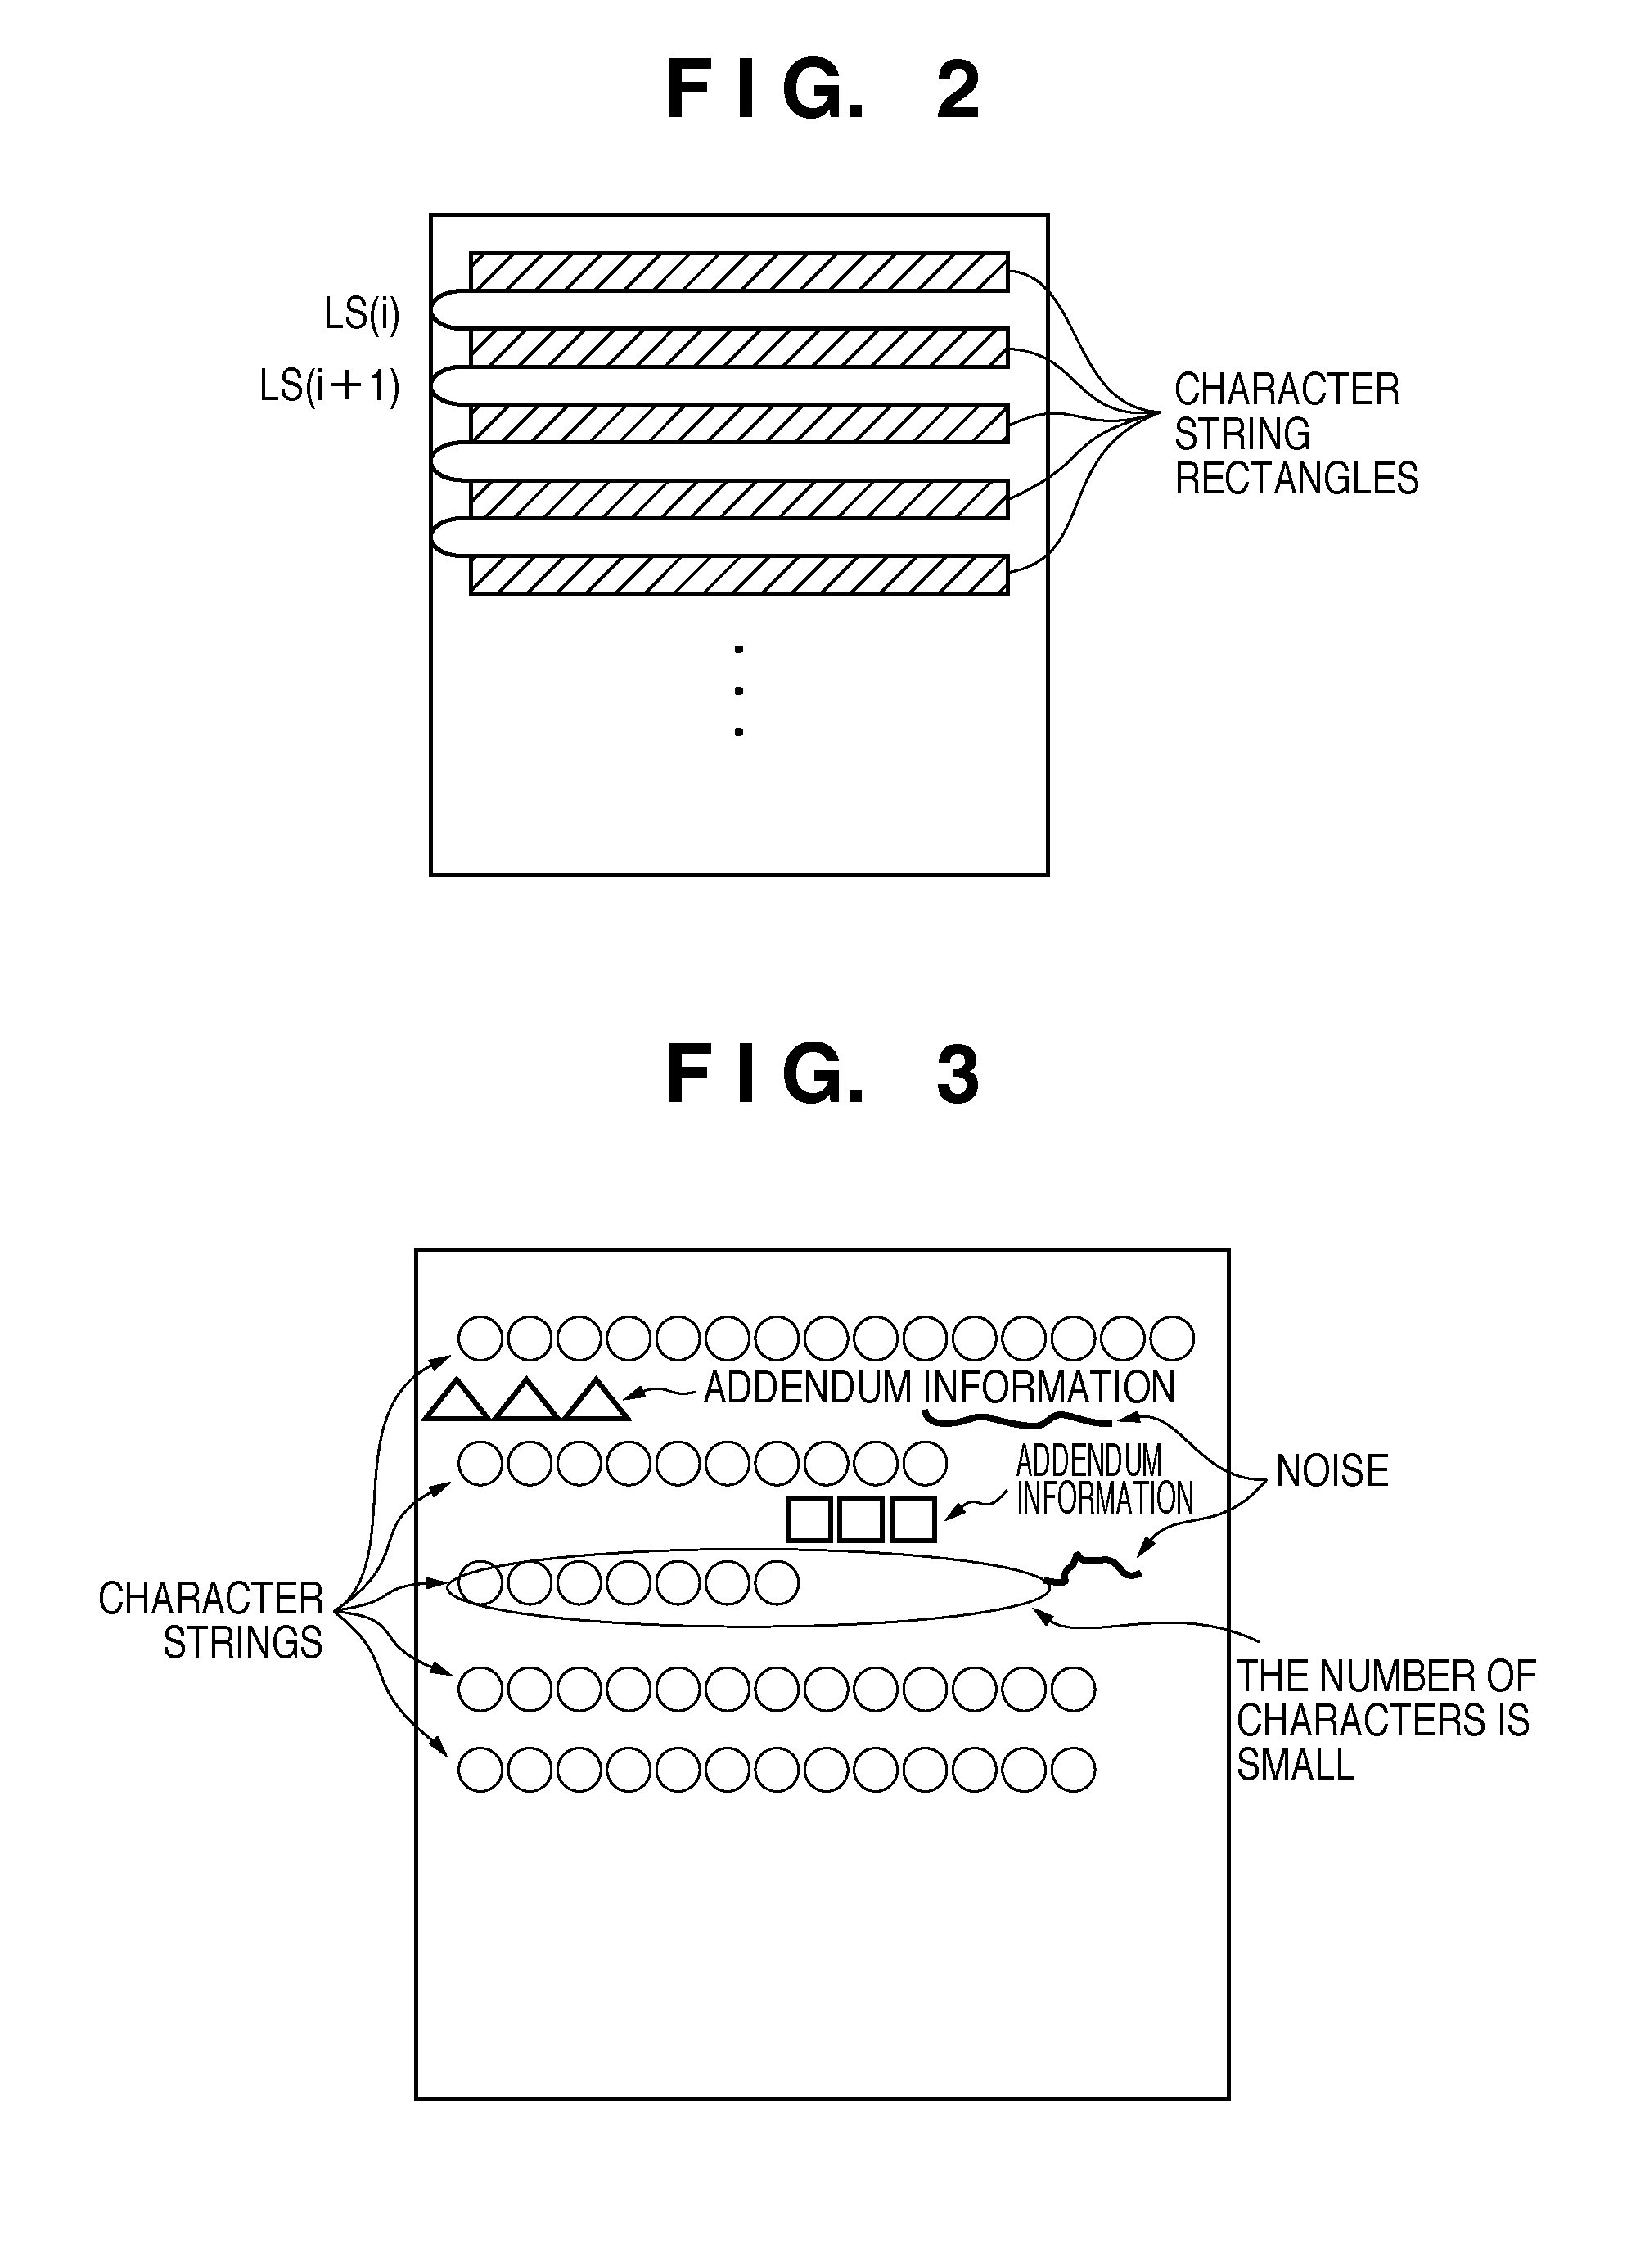 Document processing apparatus and document processing method